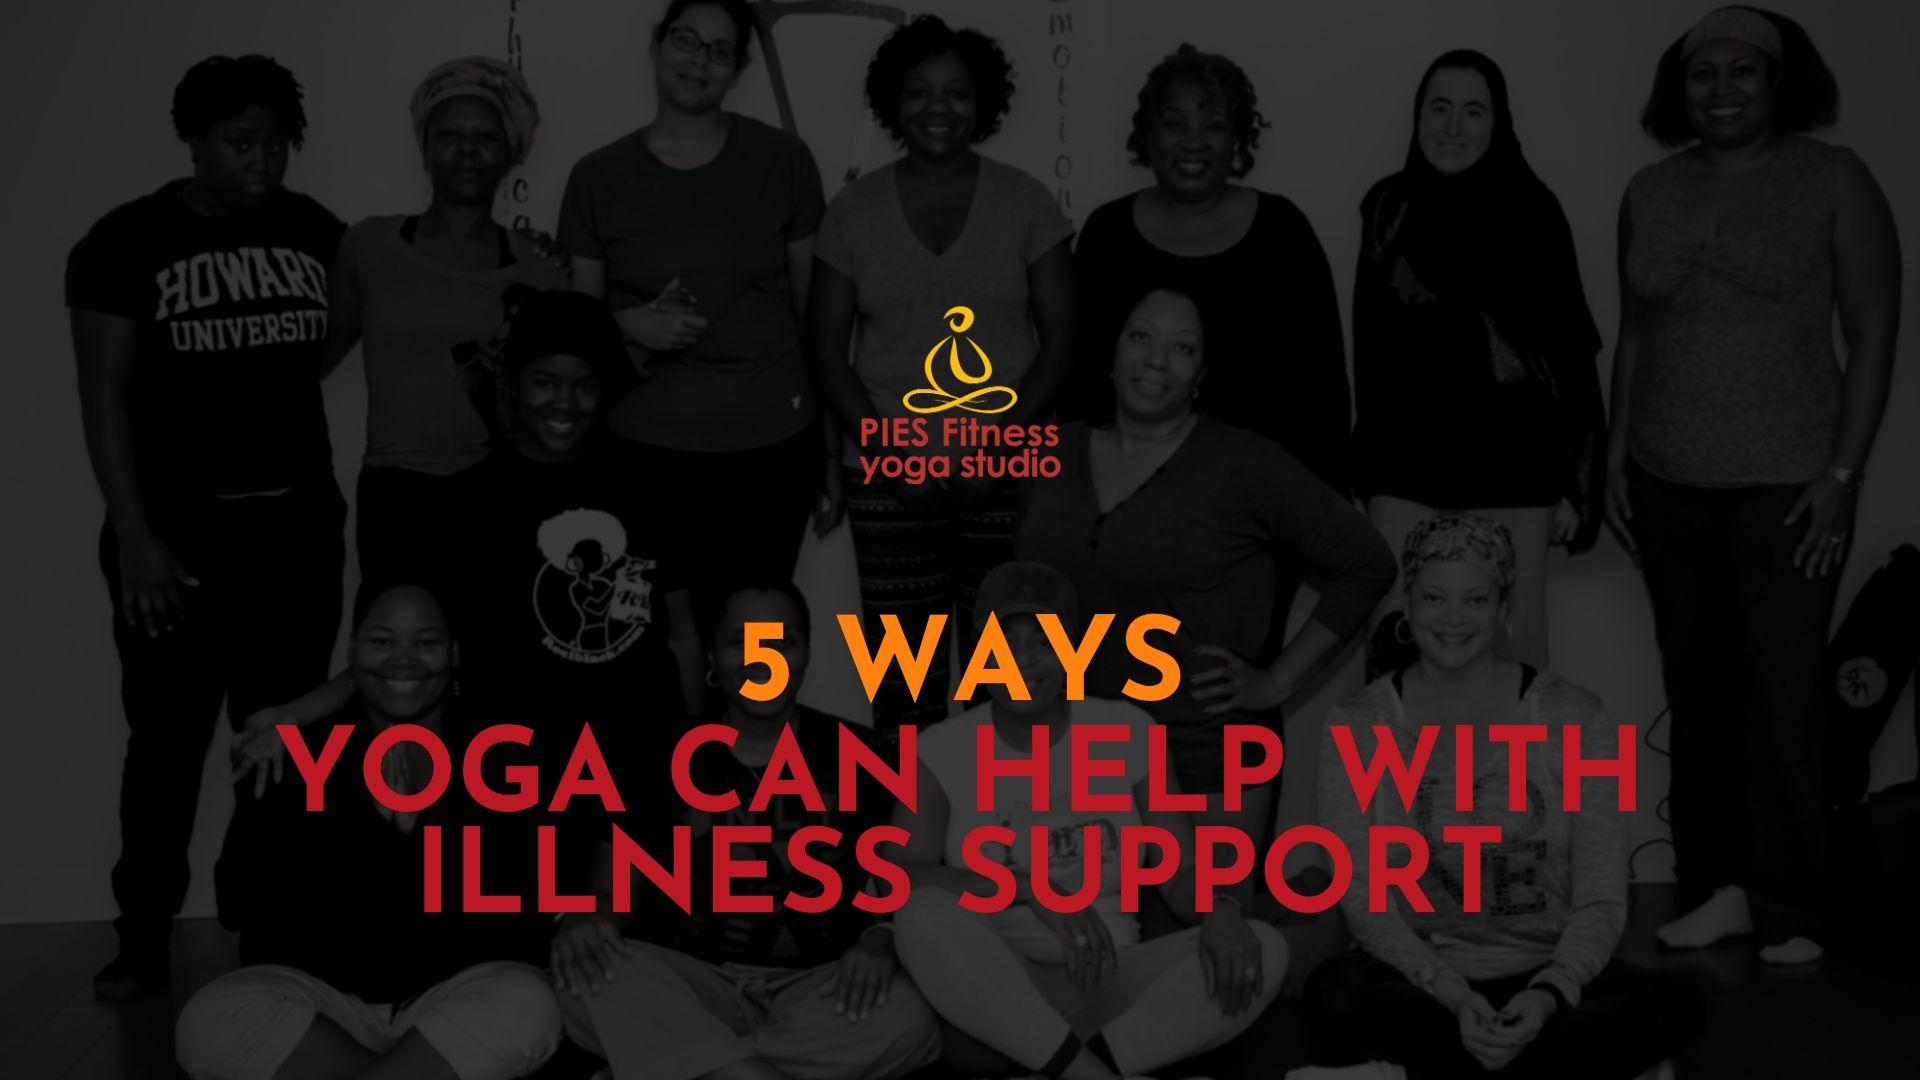 5 Ways Yoga can Help with Illness Support